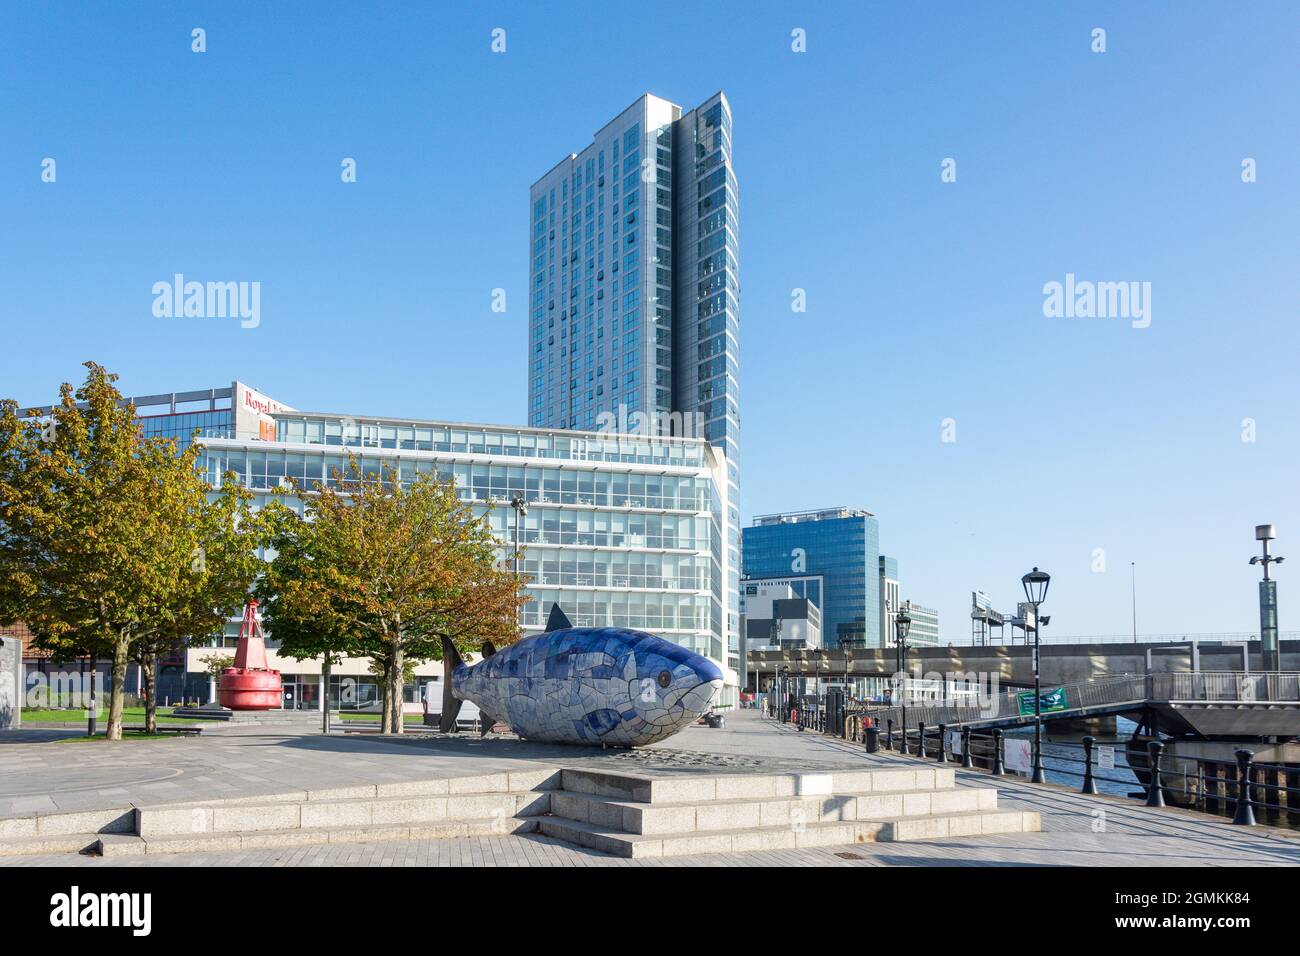 The Salmon of Knowledge (The Big Fish) and The Obel high-rise building, Donegall Quay, City of Belfast, Northern Ireland, United Kingdom Stock Photo